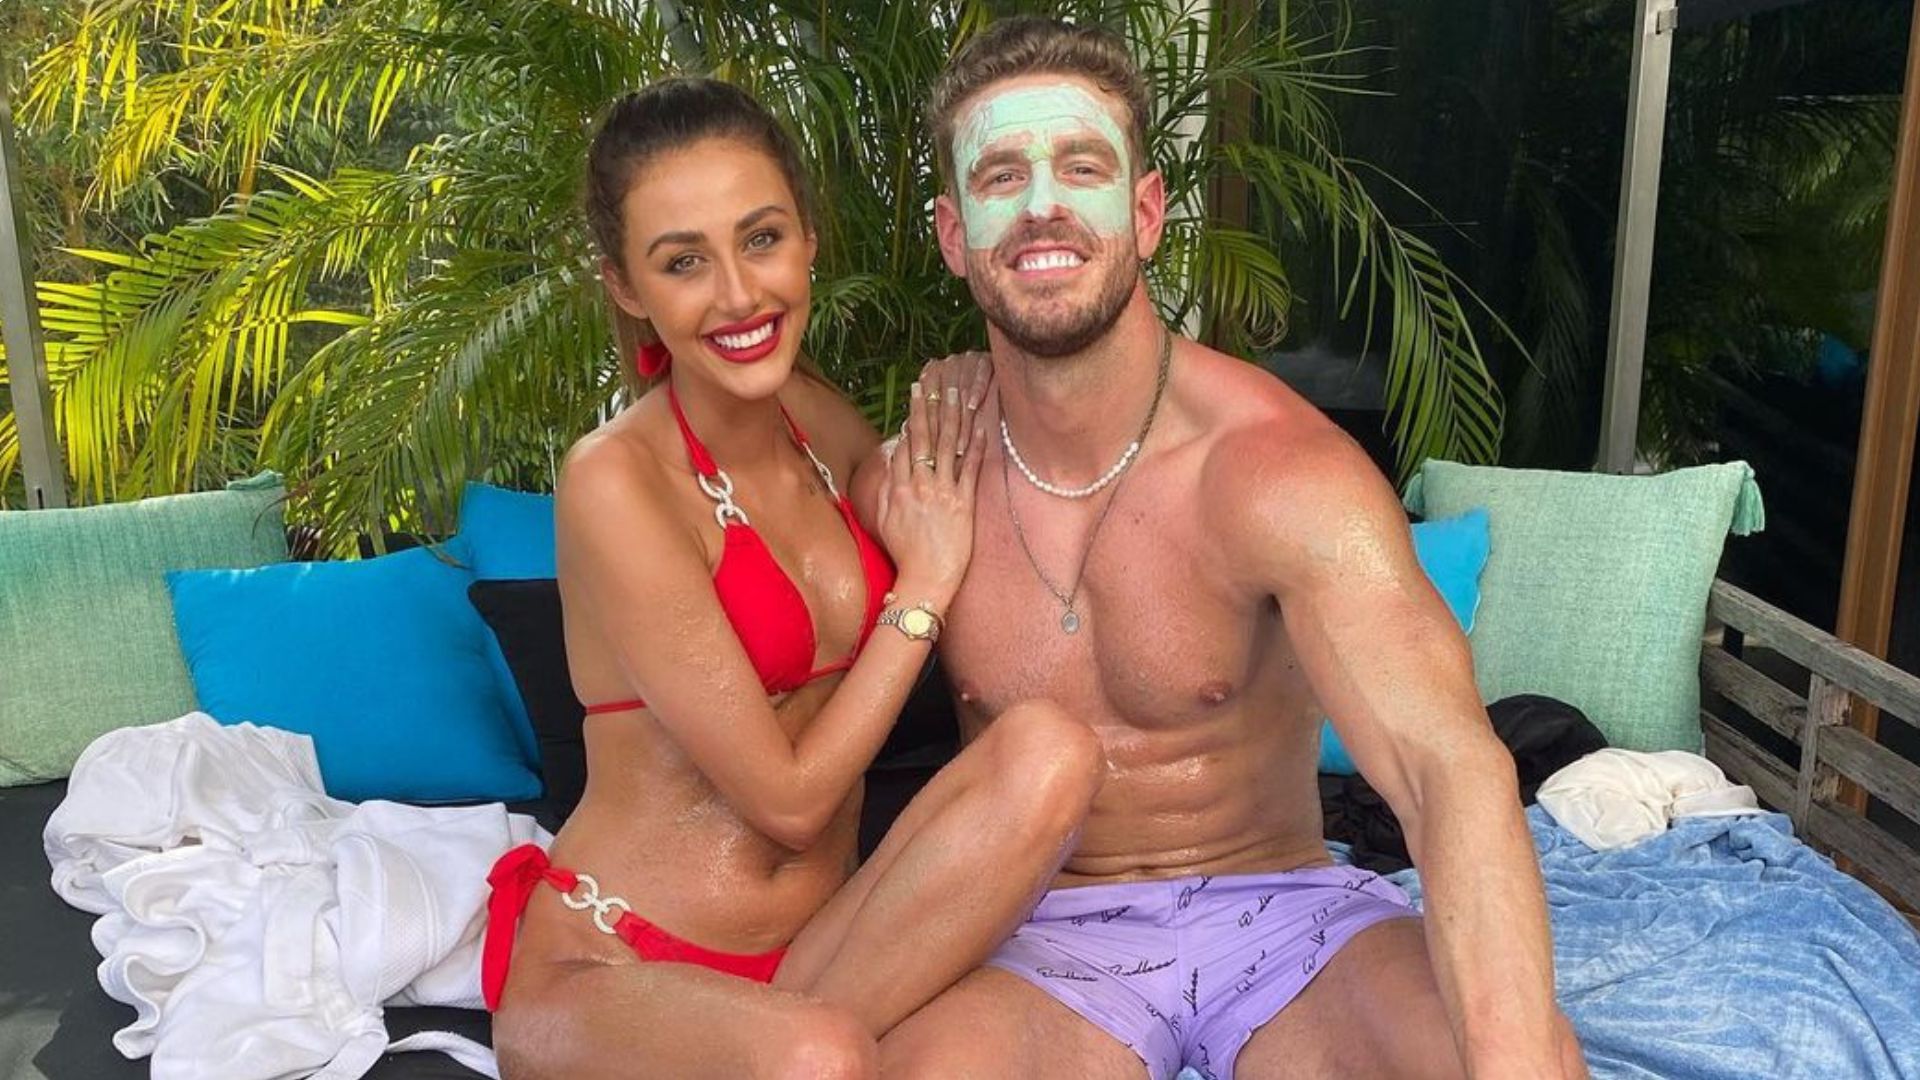 Perfect Match: Are Chloe And Shayne Still Together?